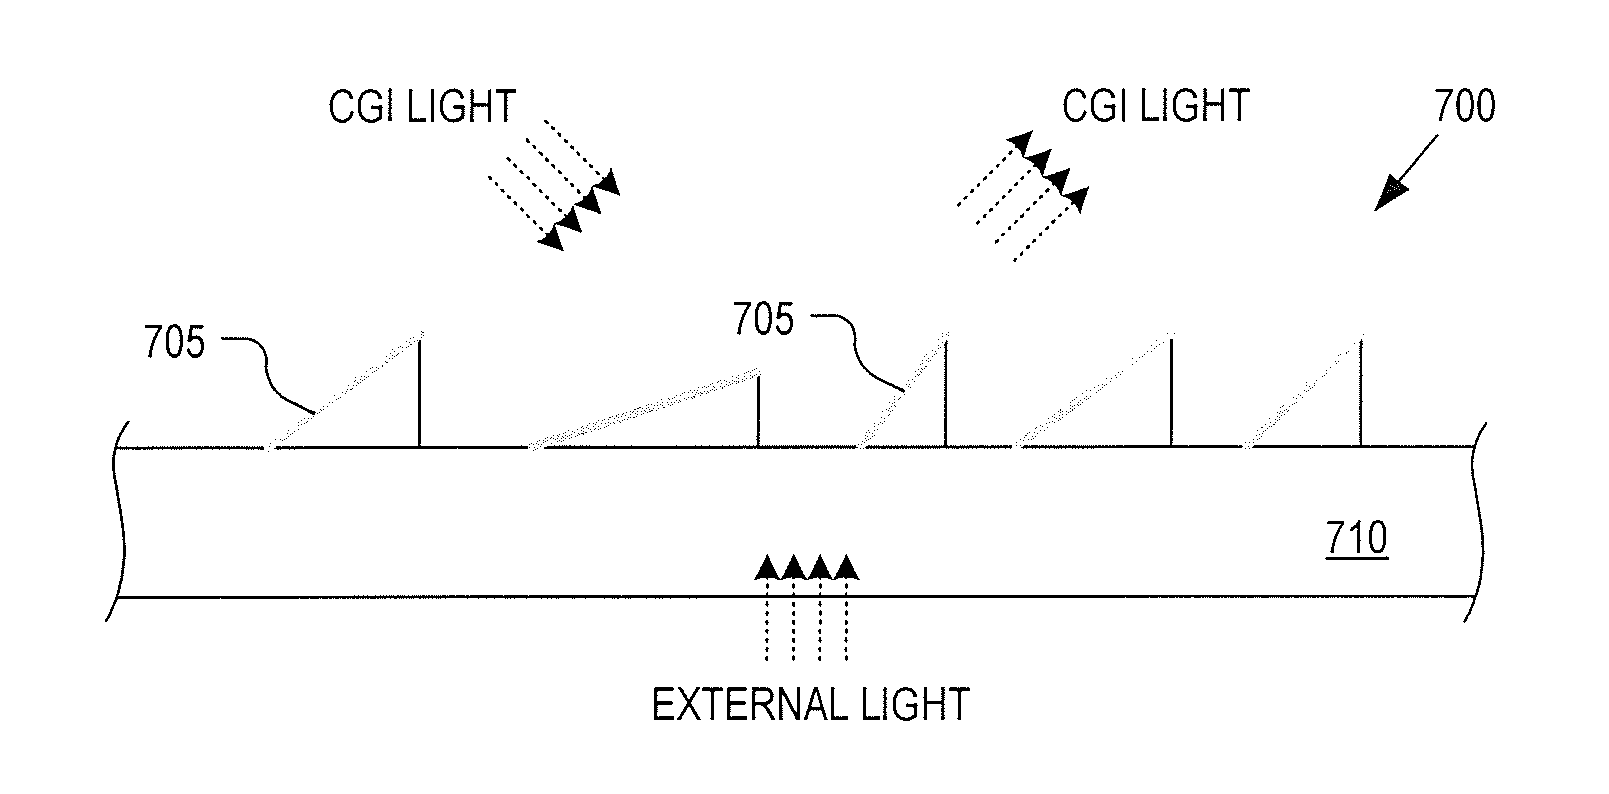 Near-to-eye display with diffraction grating that bends and focuses light